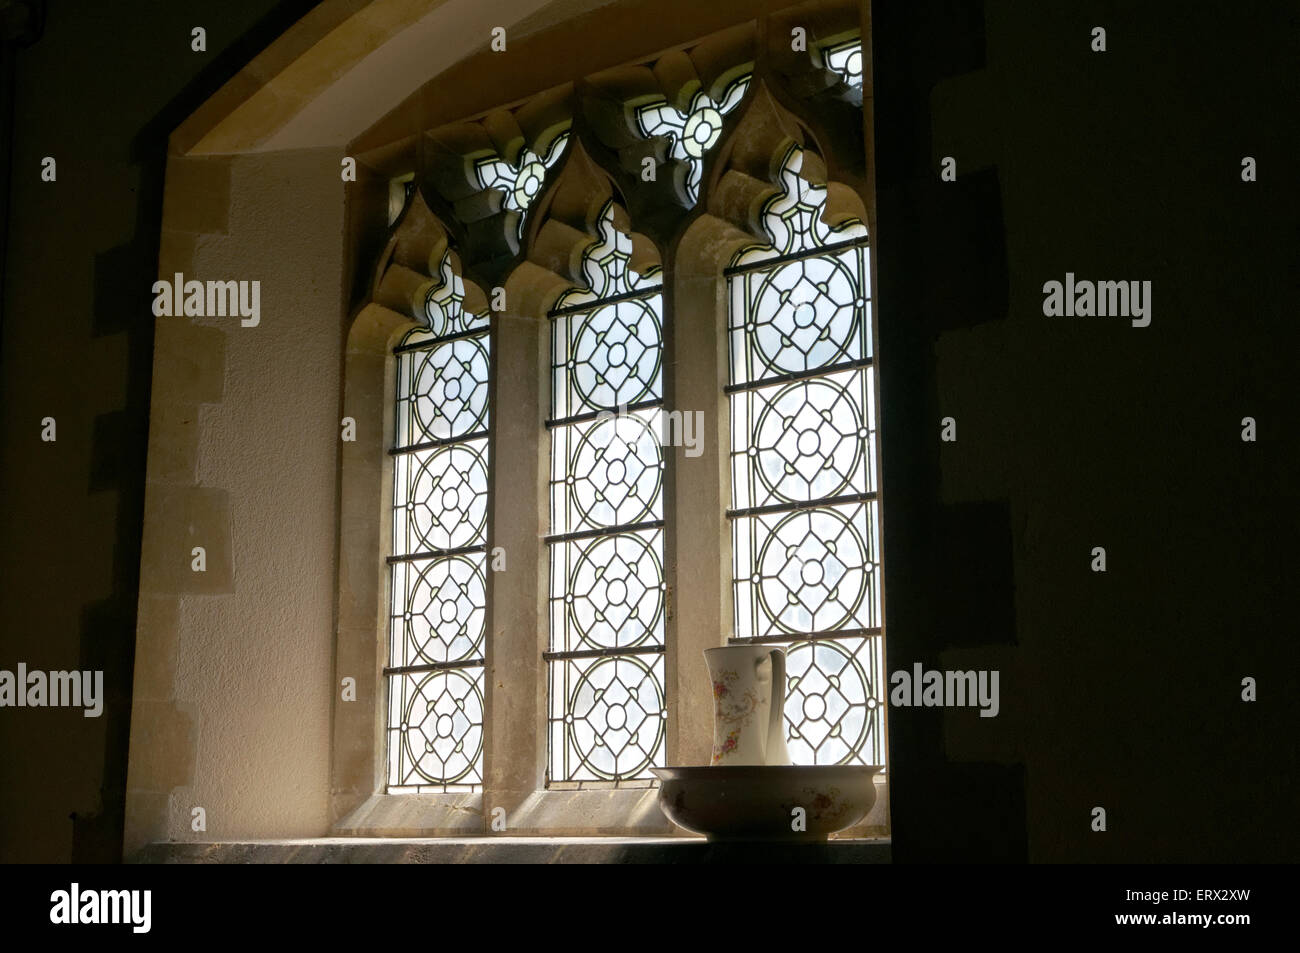 Stained Glass windows, St Hilary's Church, St Hilary, Cowbridge, Vale of Glamorgan, South Wales, UK. Stock Photo